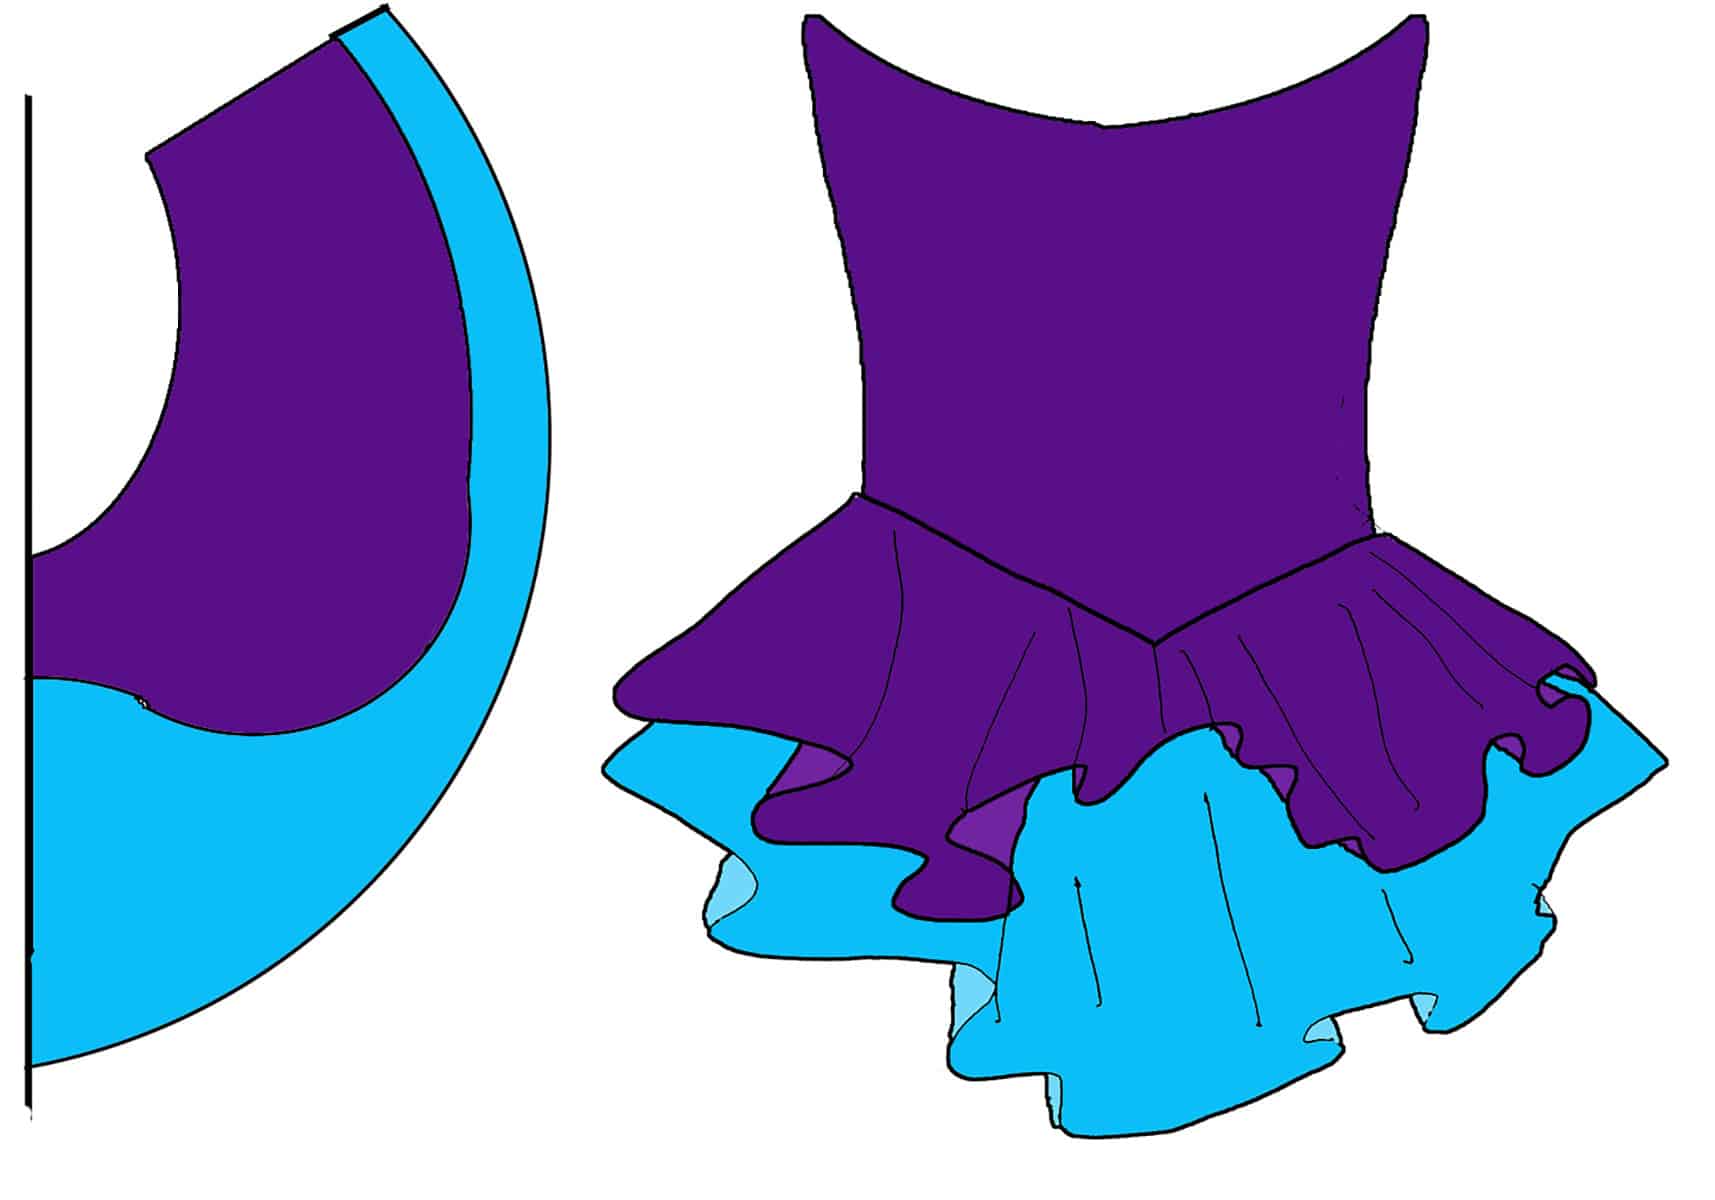 A sketch of a purple and blue layered skating skirt pattern, and how it would look as a skating dress.